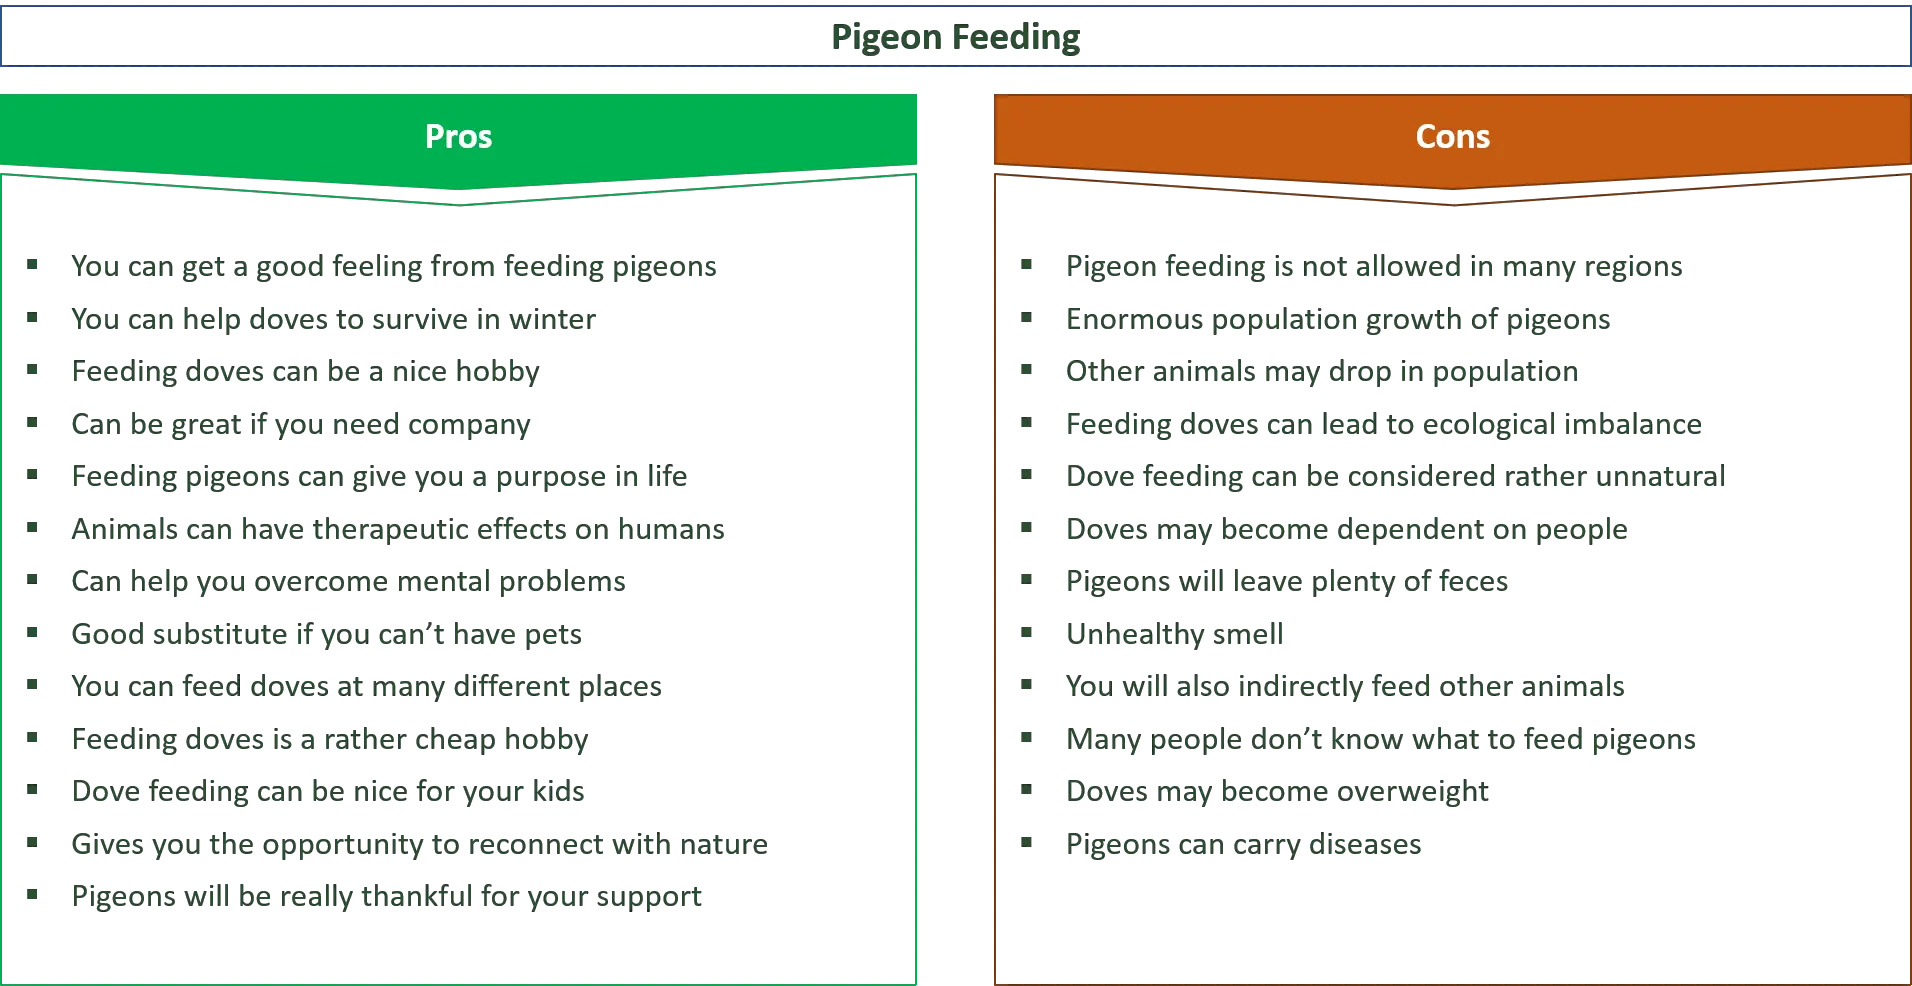 advantages and disadvantages of pigeon feeding